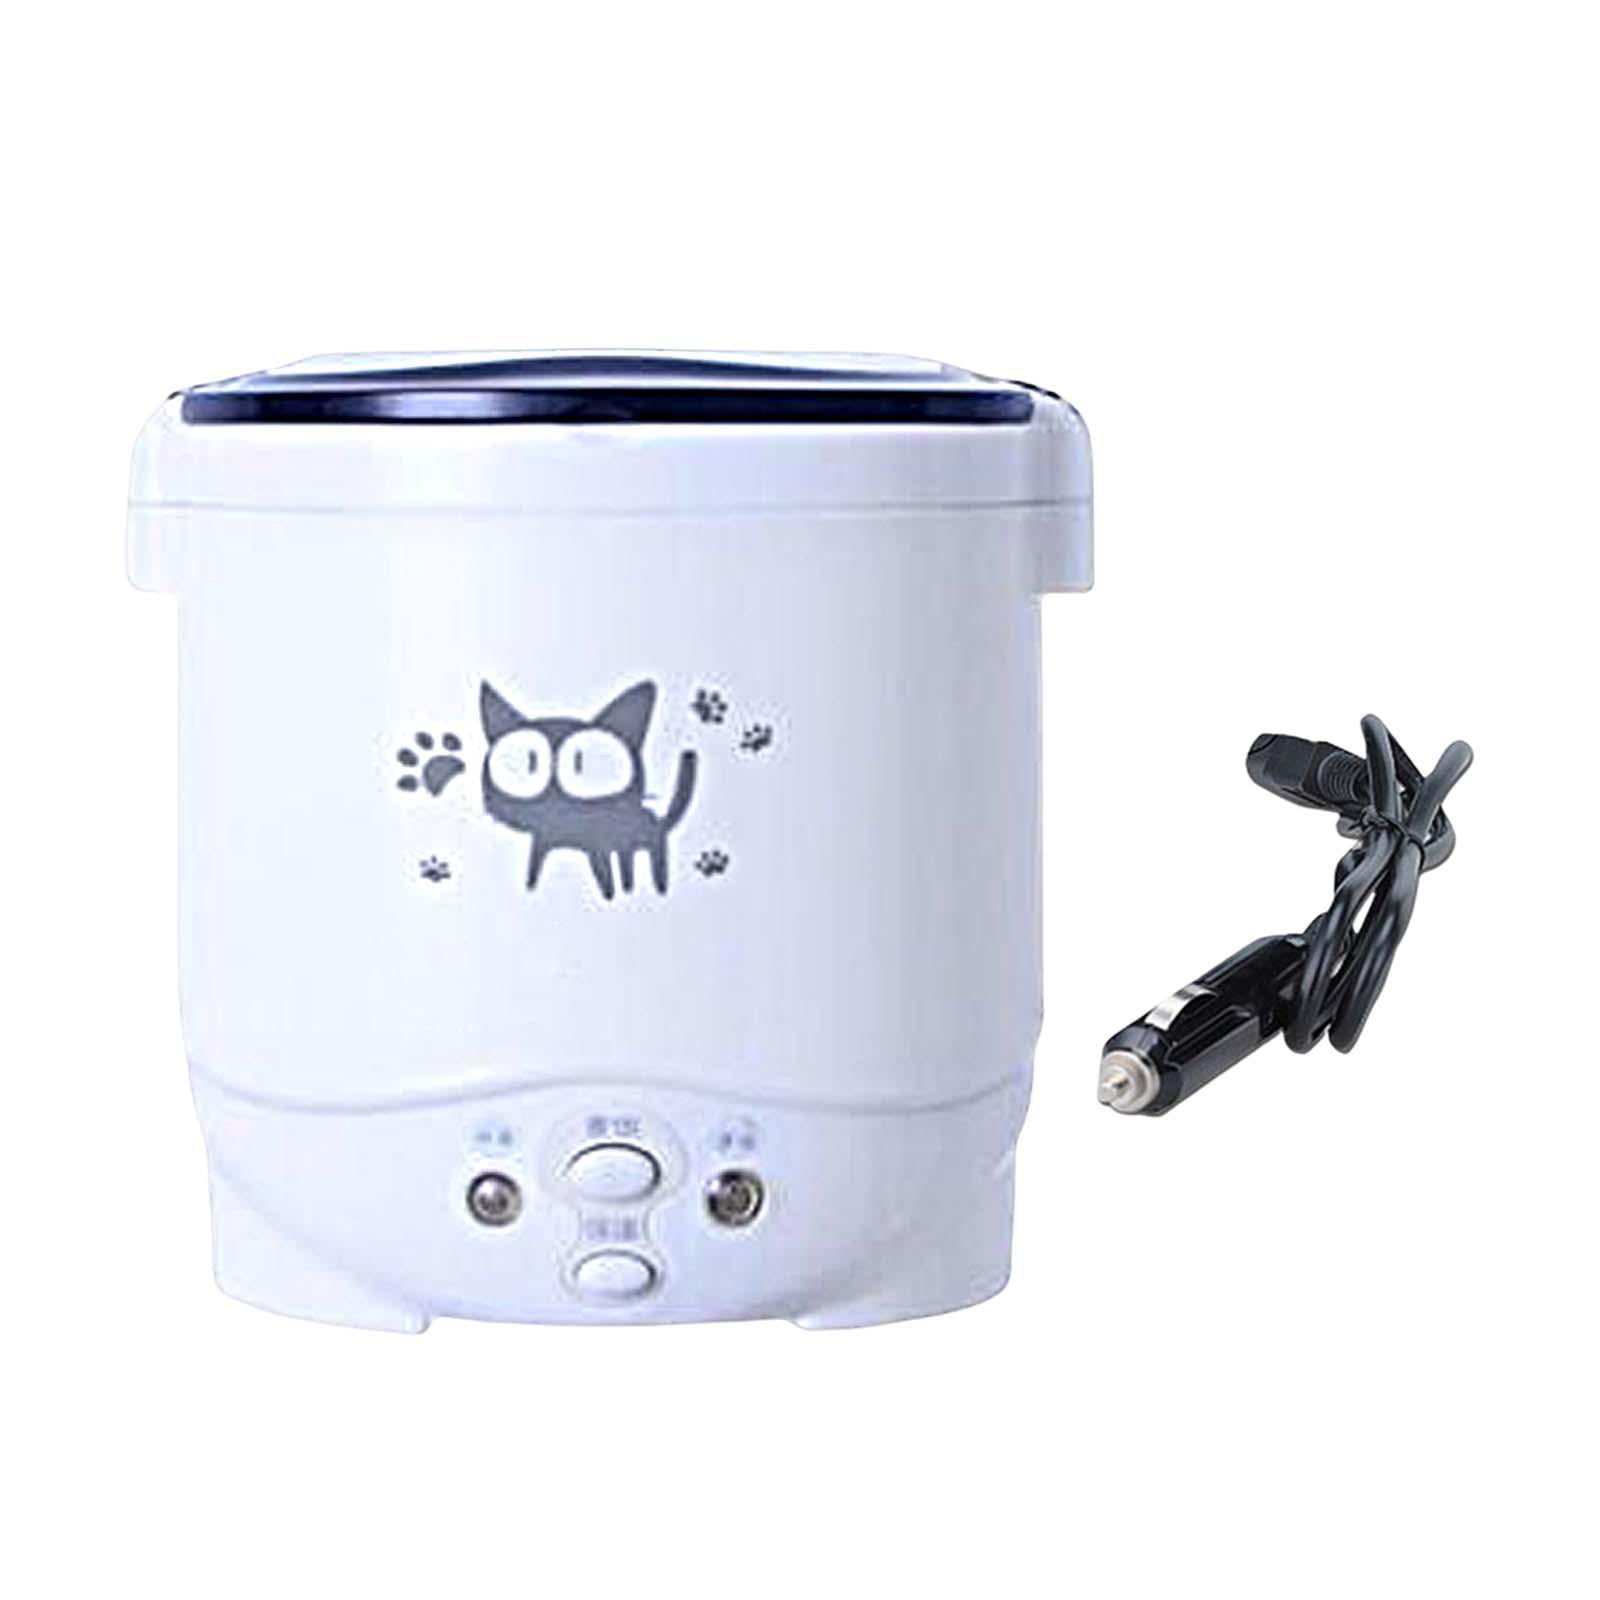 Miumaeov Mini Rice Cooker Steamer 12V for Car Portable Trunk Car Food Warmer Lunch Box 1L 100W Multi-functional Car Rice Cooker Meal Heater Automatic